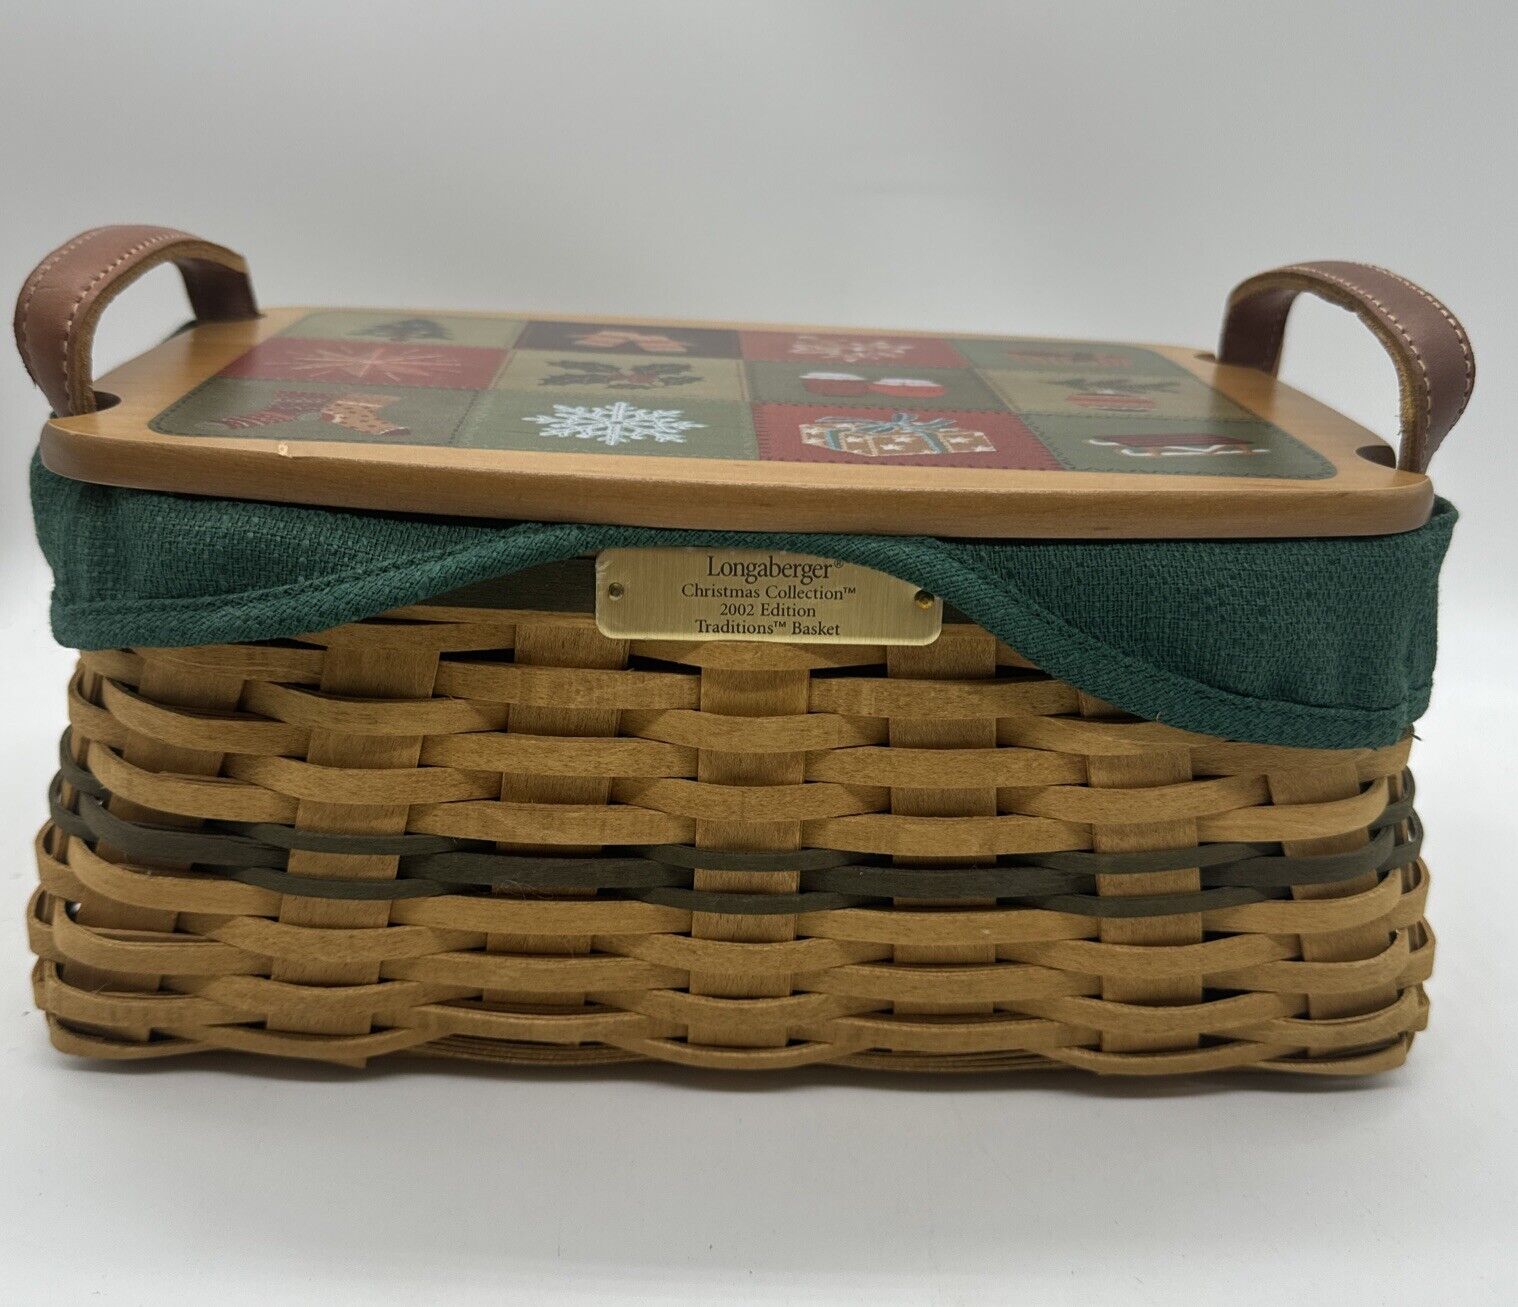 2002 Longaberger Christmas Collections Traditions Basket Combo W/ Patchwork Lid